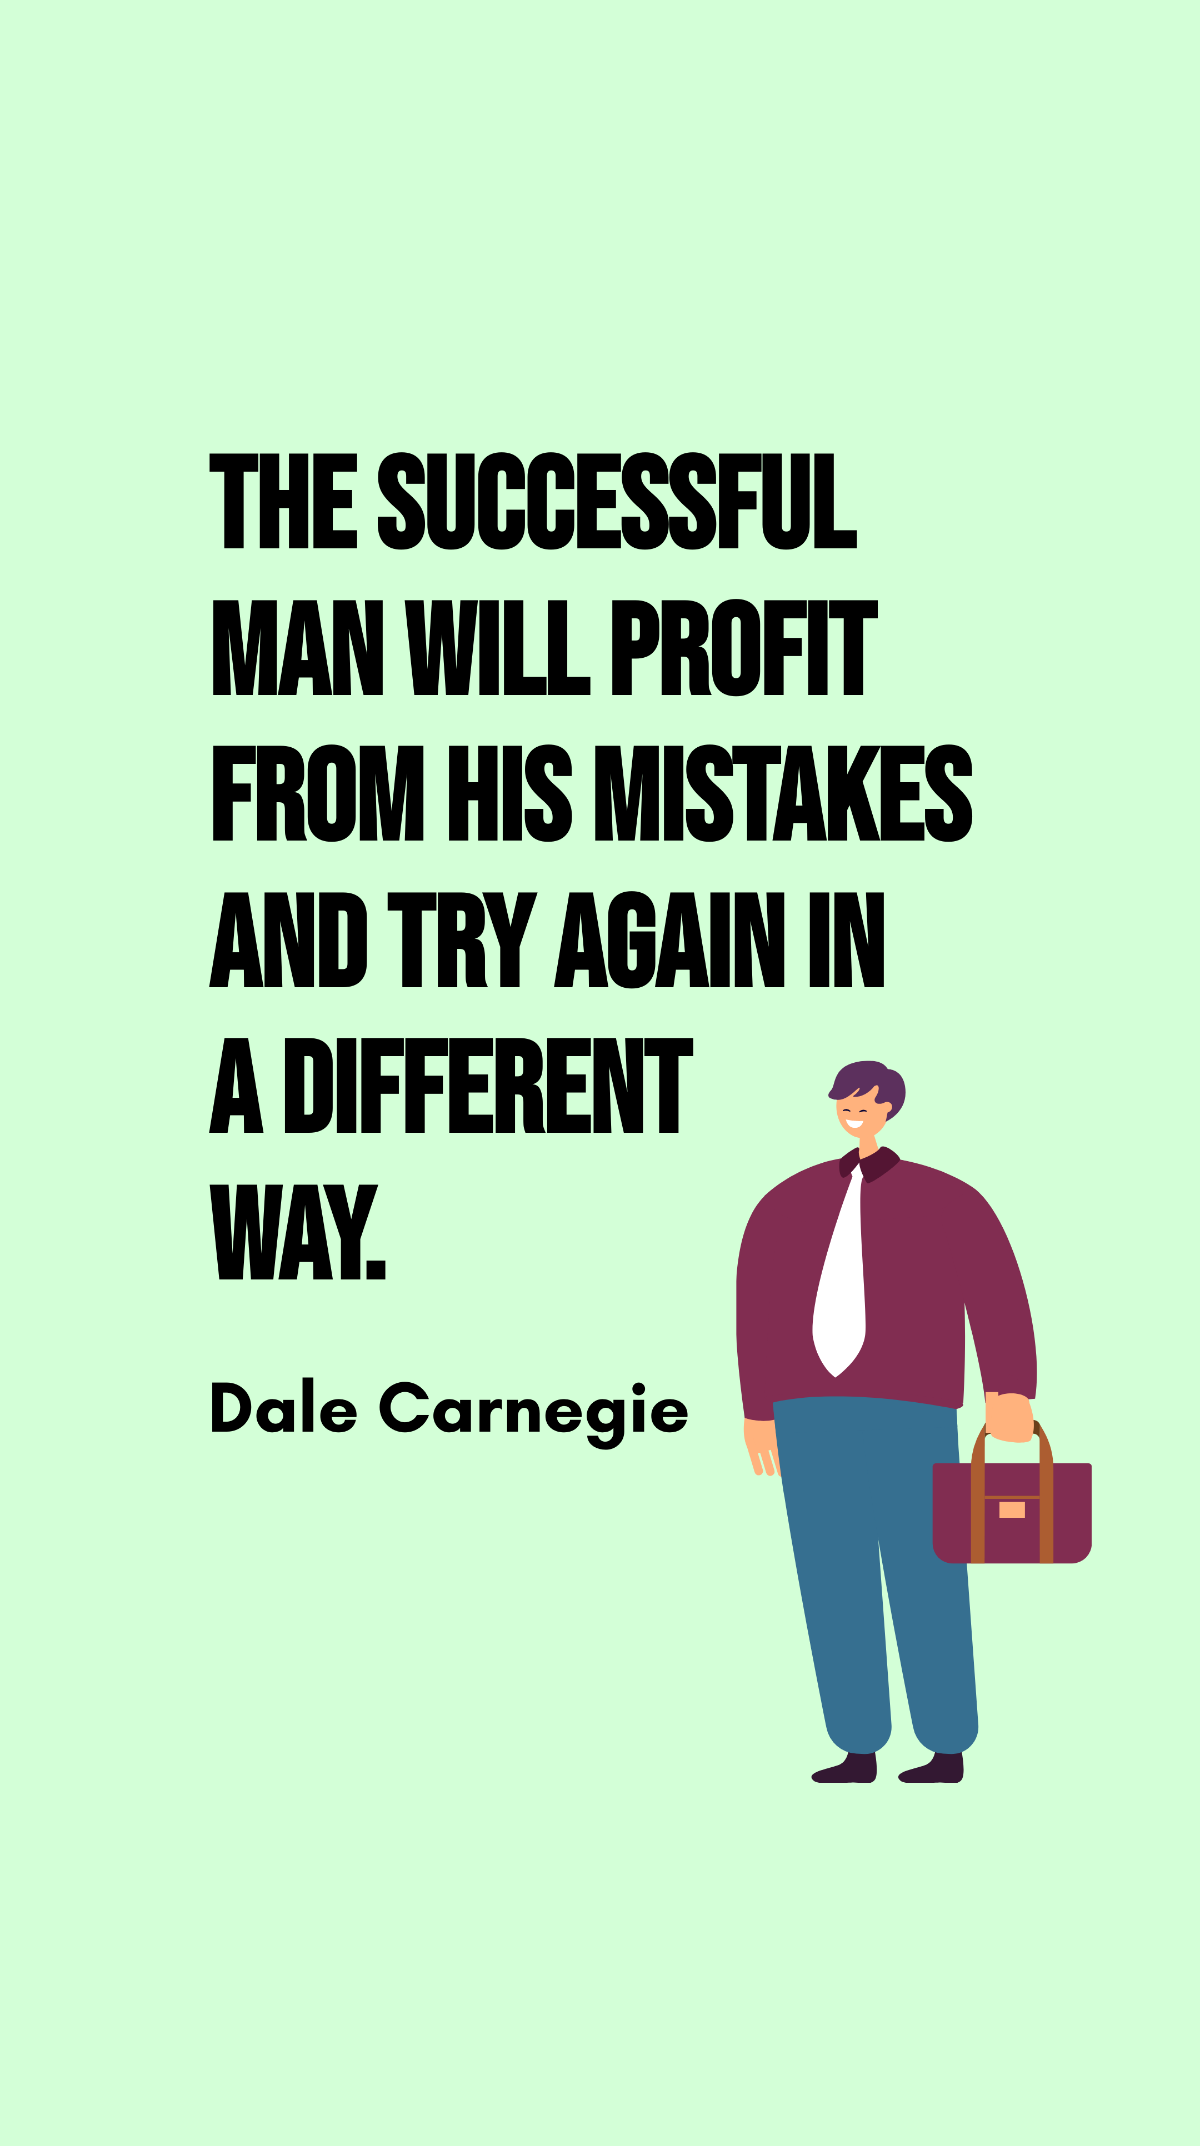 Dale Carnegie - The successful man will profit from his mistakes and try again in a different way. Template